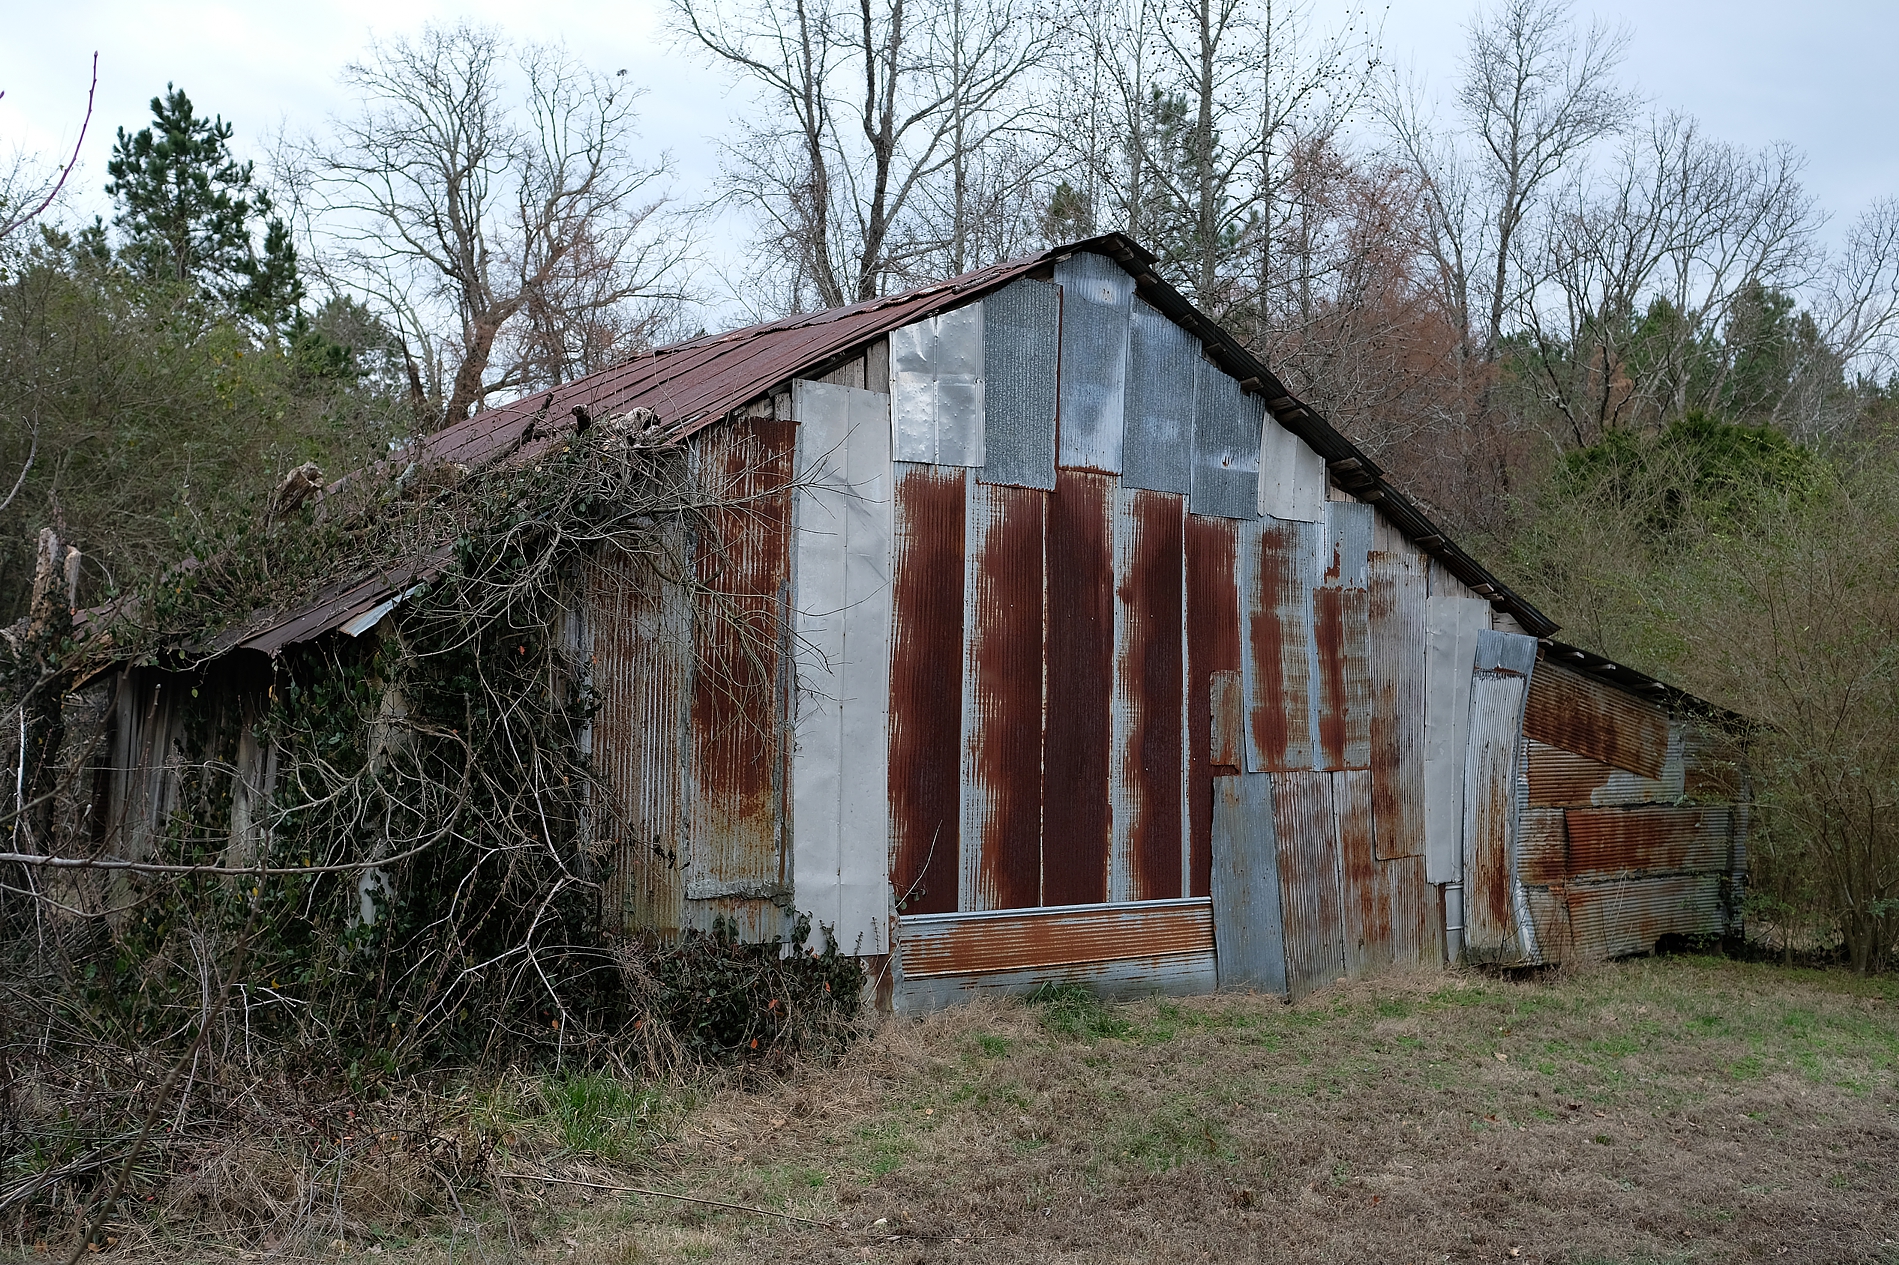  Old shed on County Road 164 in Union County 